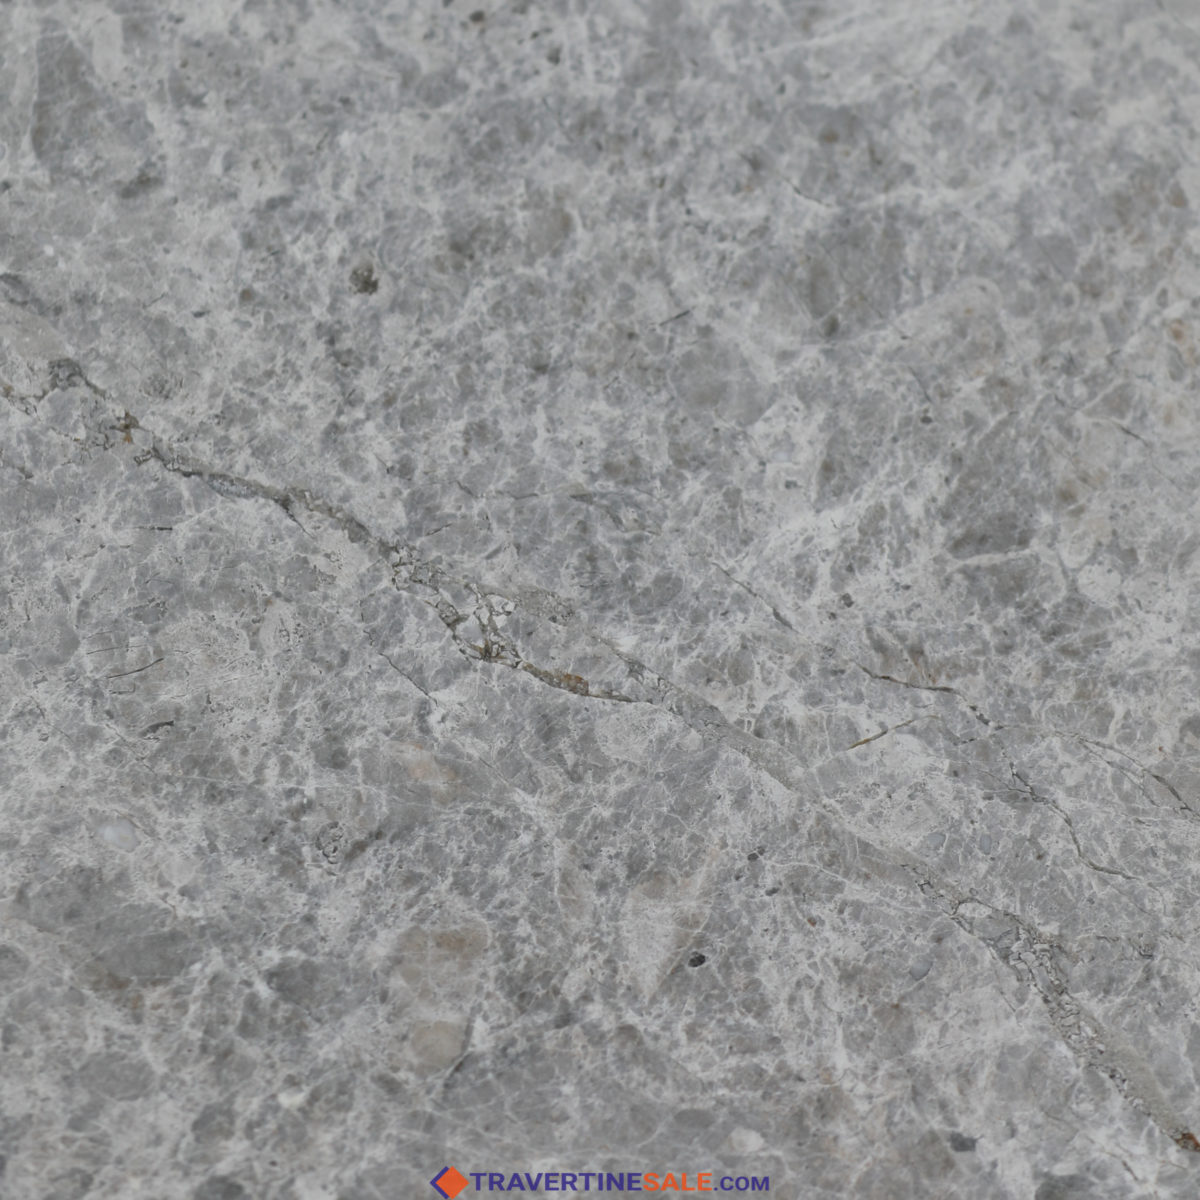 tundra gray marble light polished with grey and silver colors